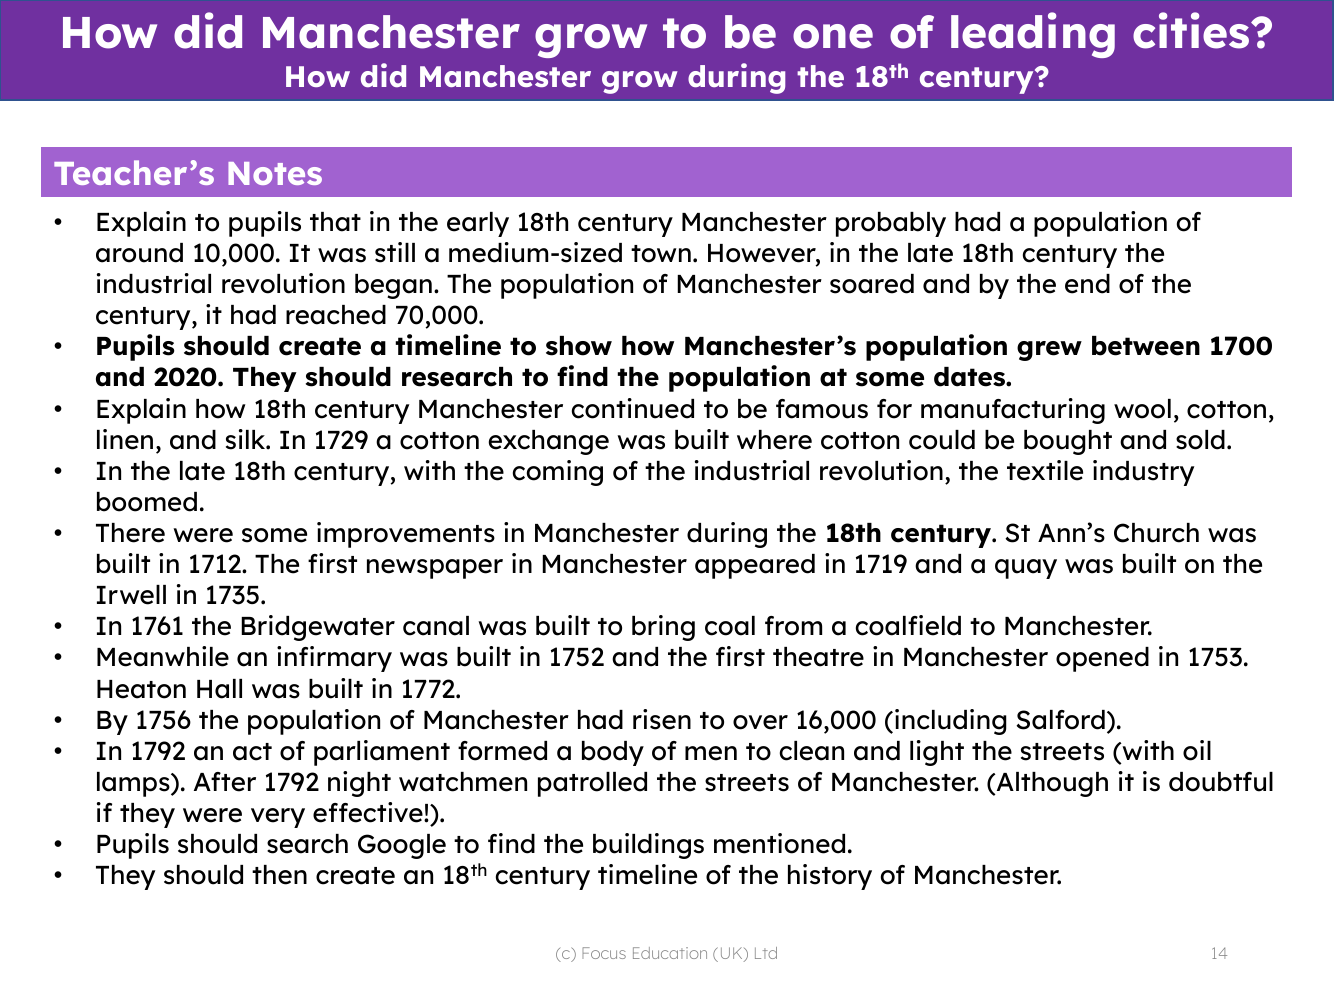 How did Manchester grow during the 18th Century? - Teacher notes